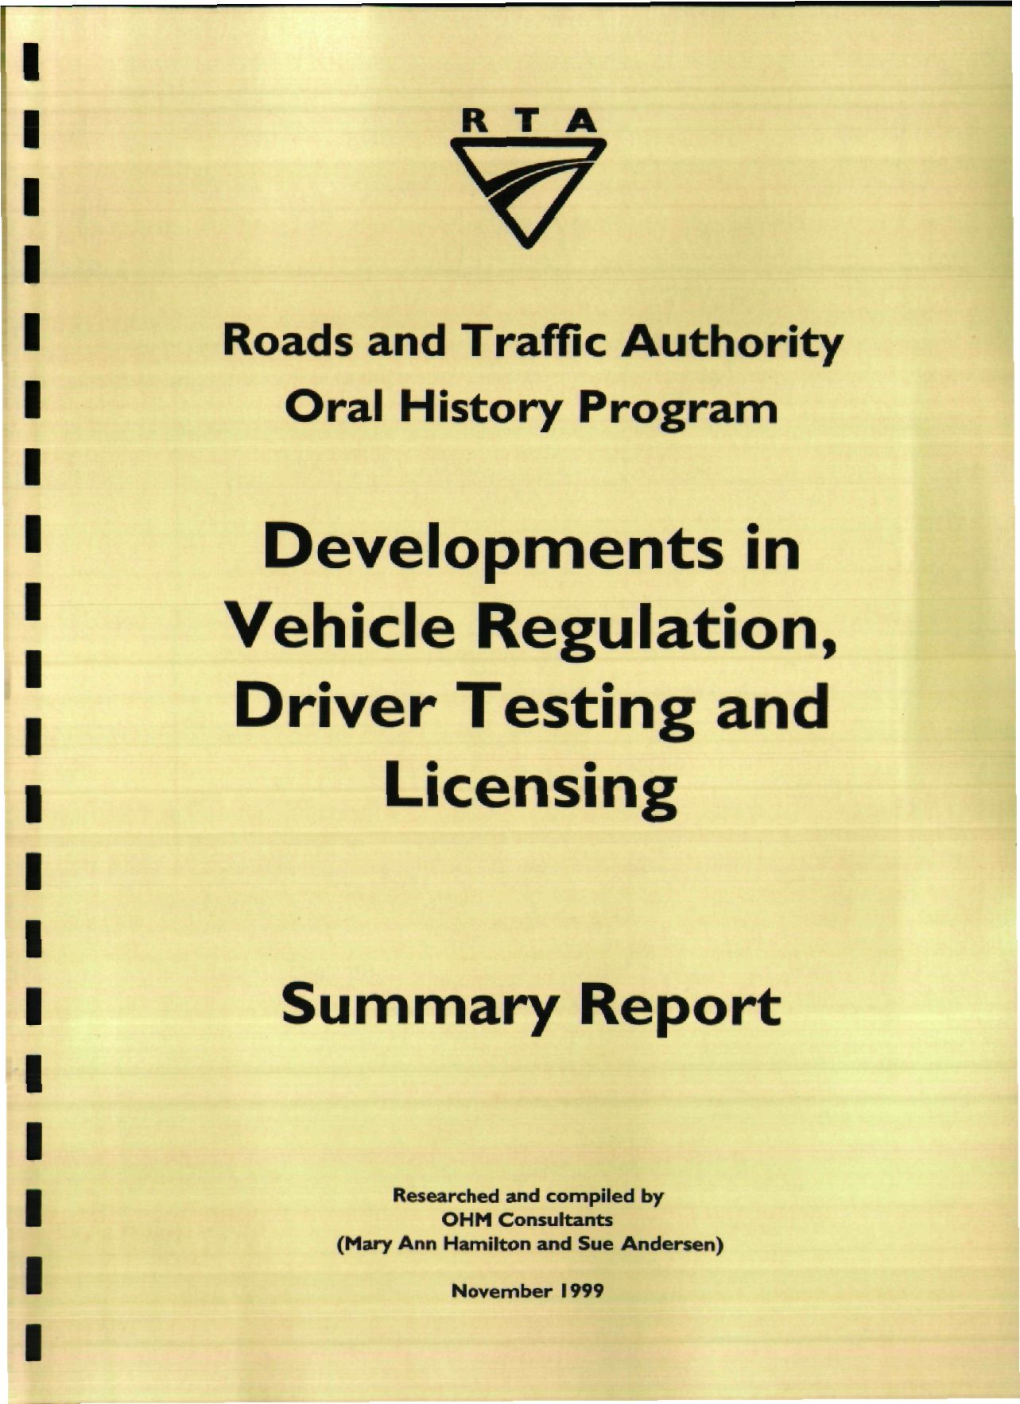 Developments in Vehicle Regulation, Driver Testing and Licensing